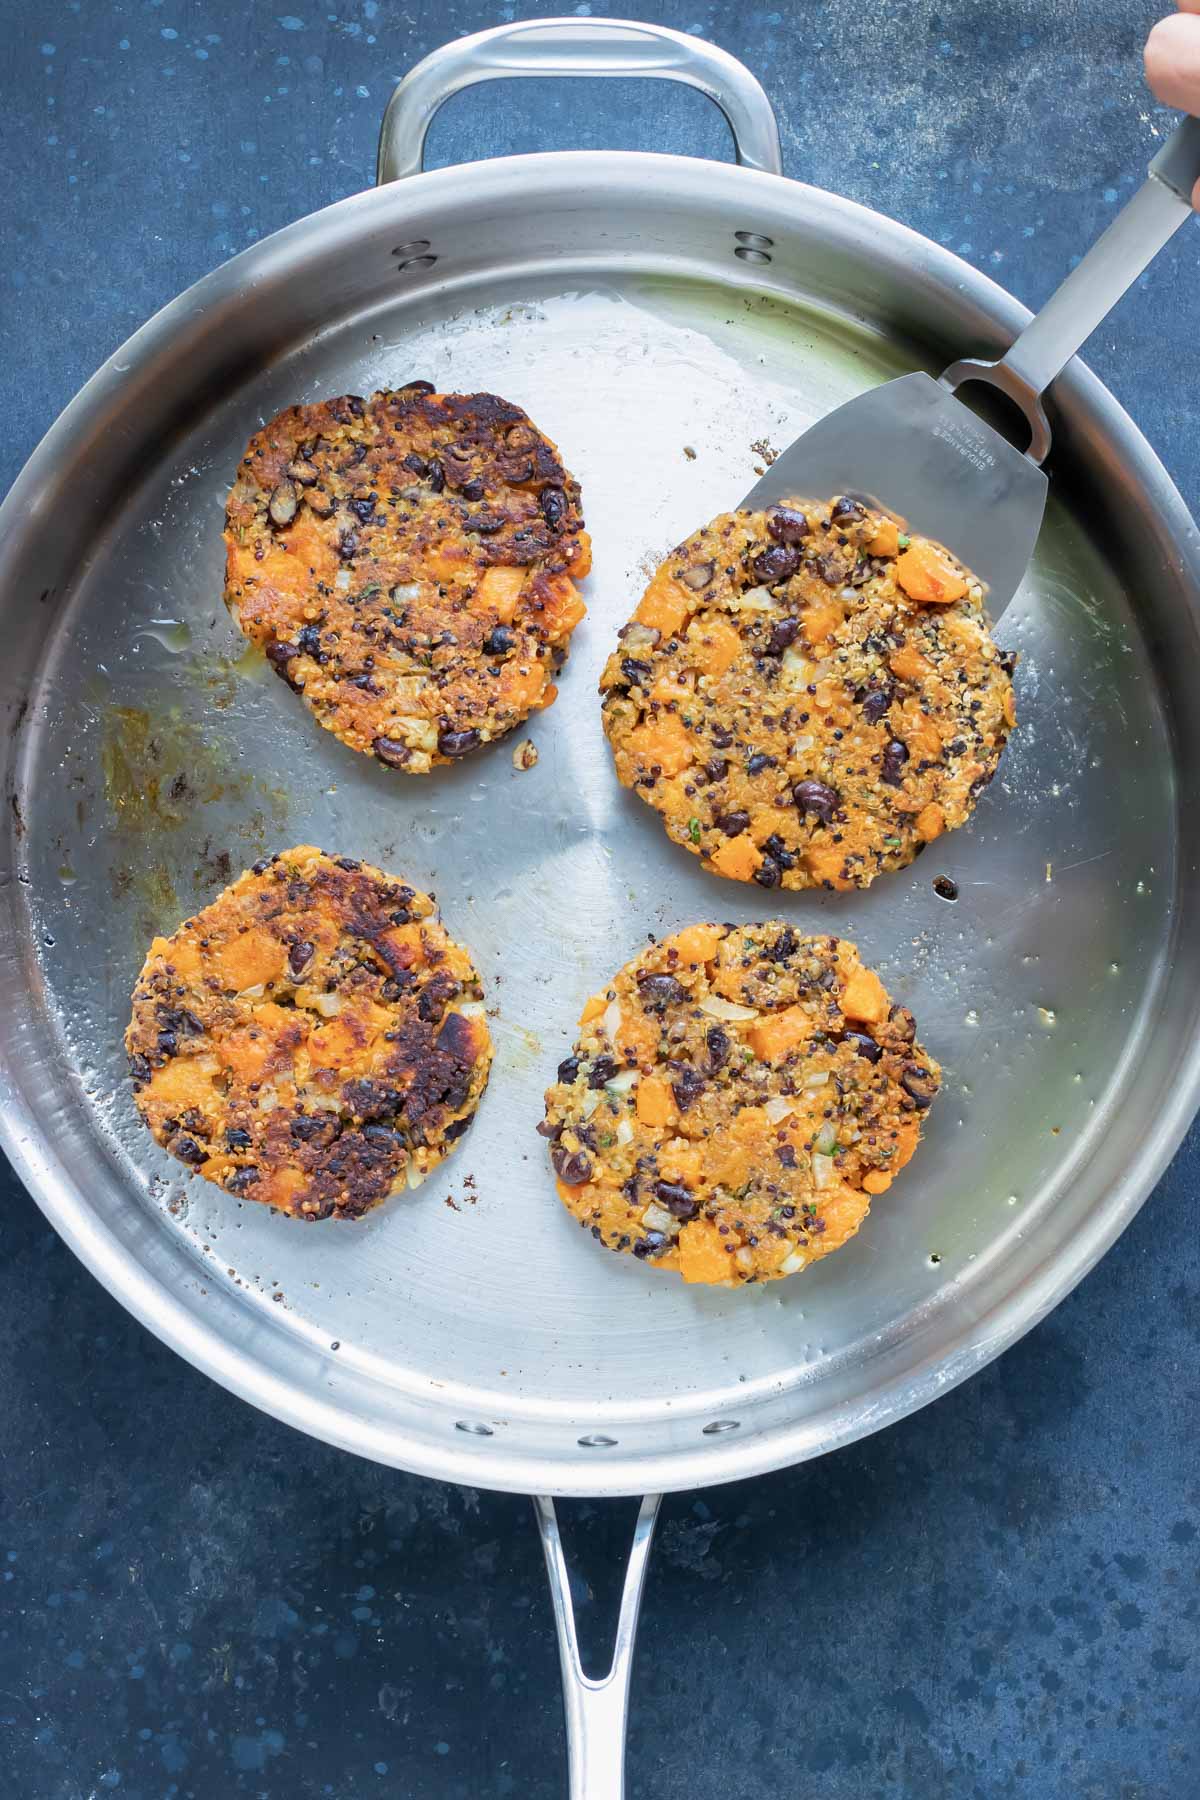 Cooking sweet potato black bean burgers in a skillet, on a baking sheet, or on the grill.